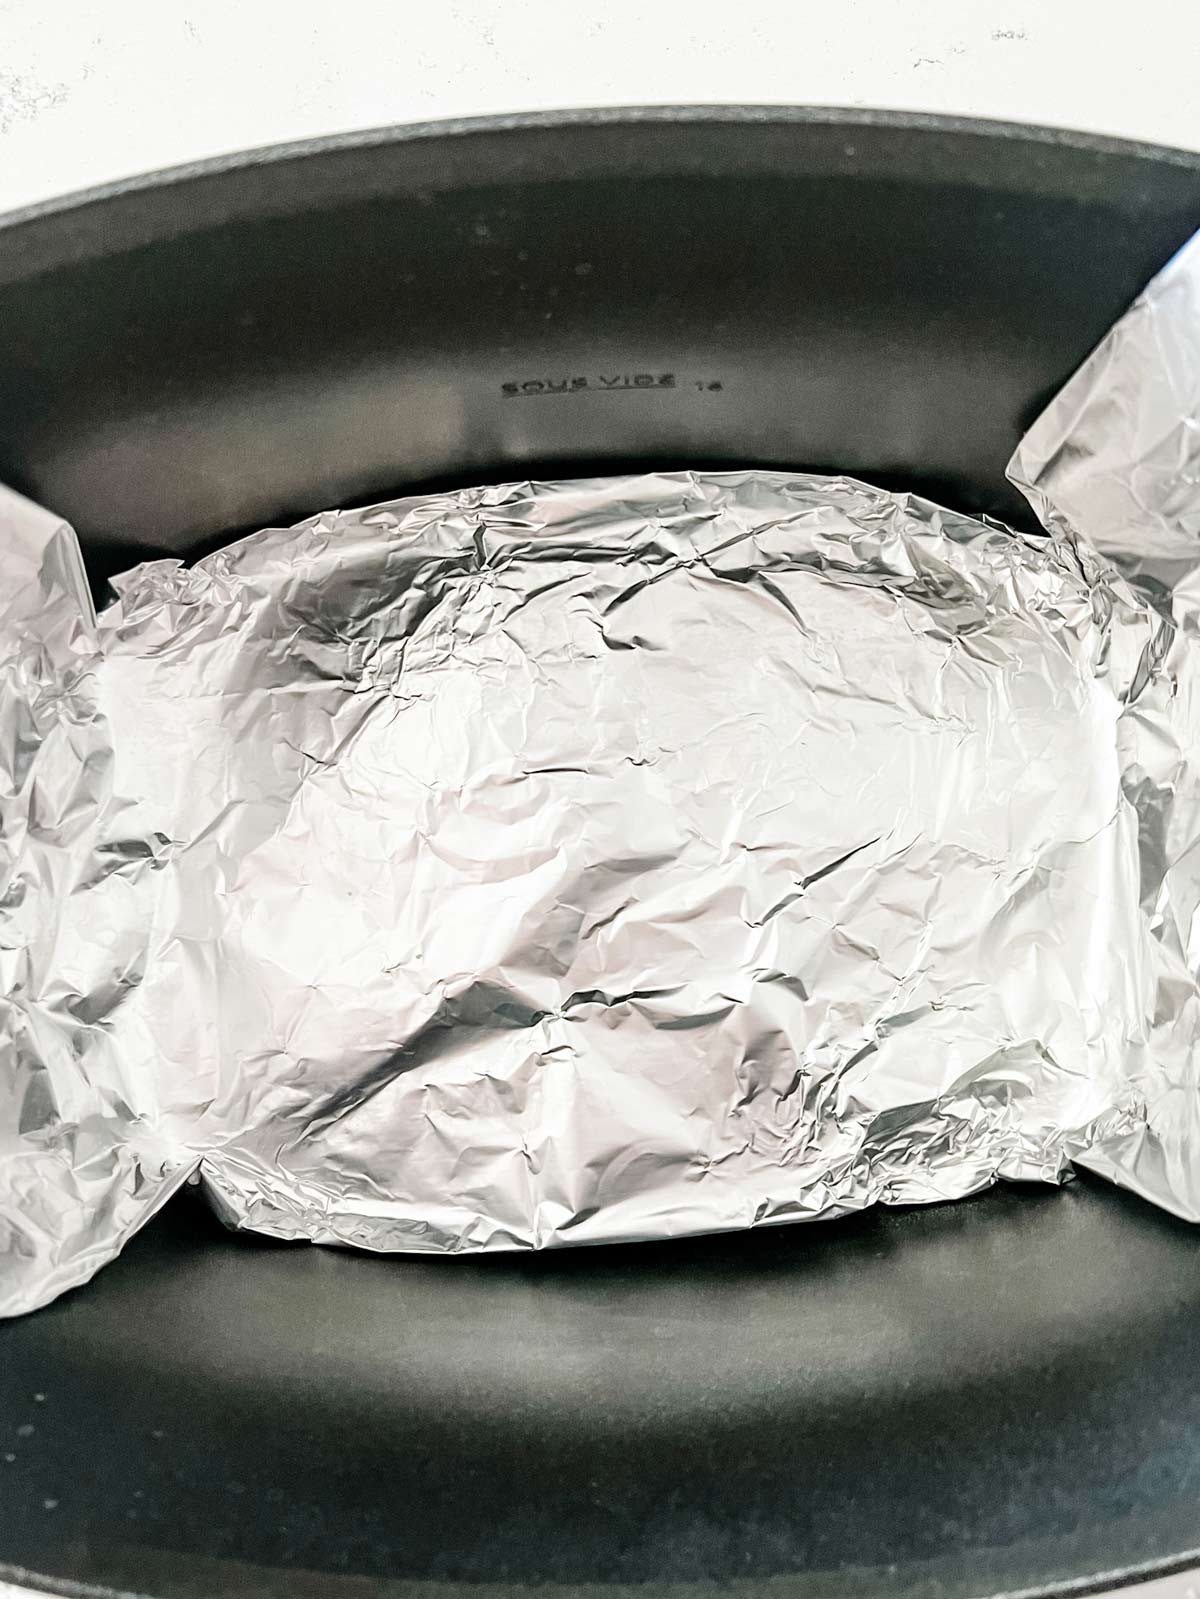 The bottom part of a foil sling in a slow cooker.